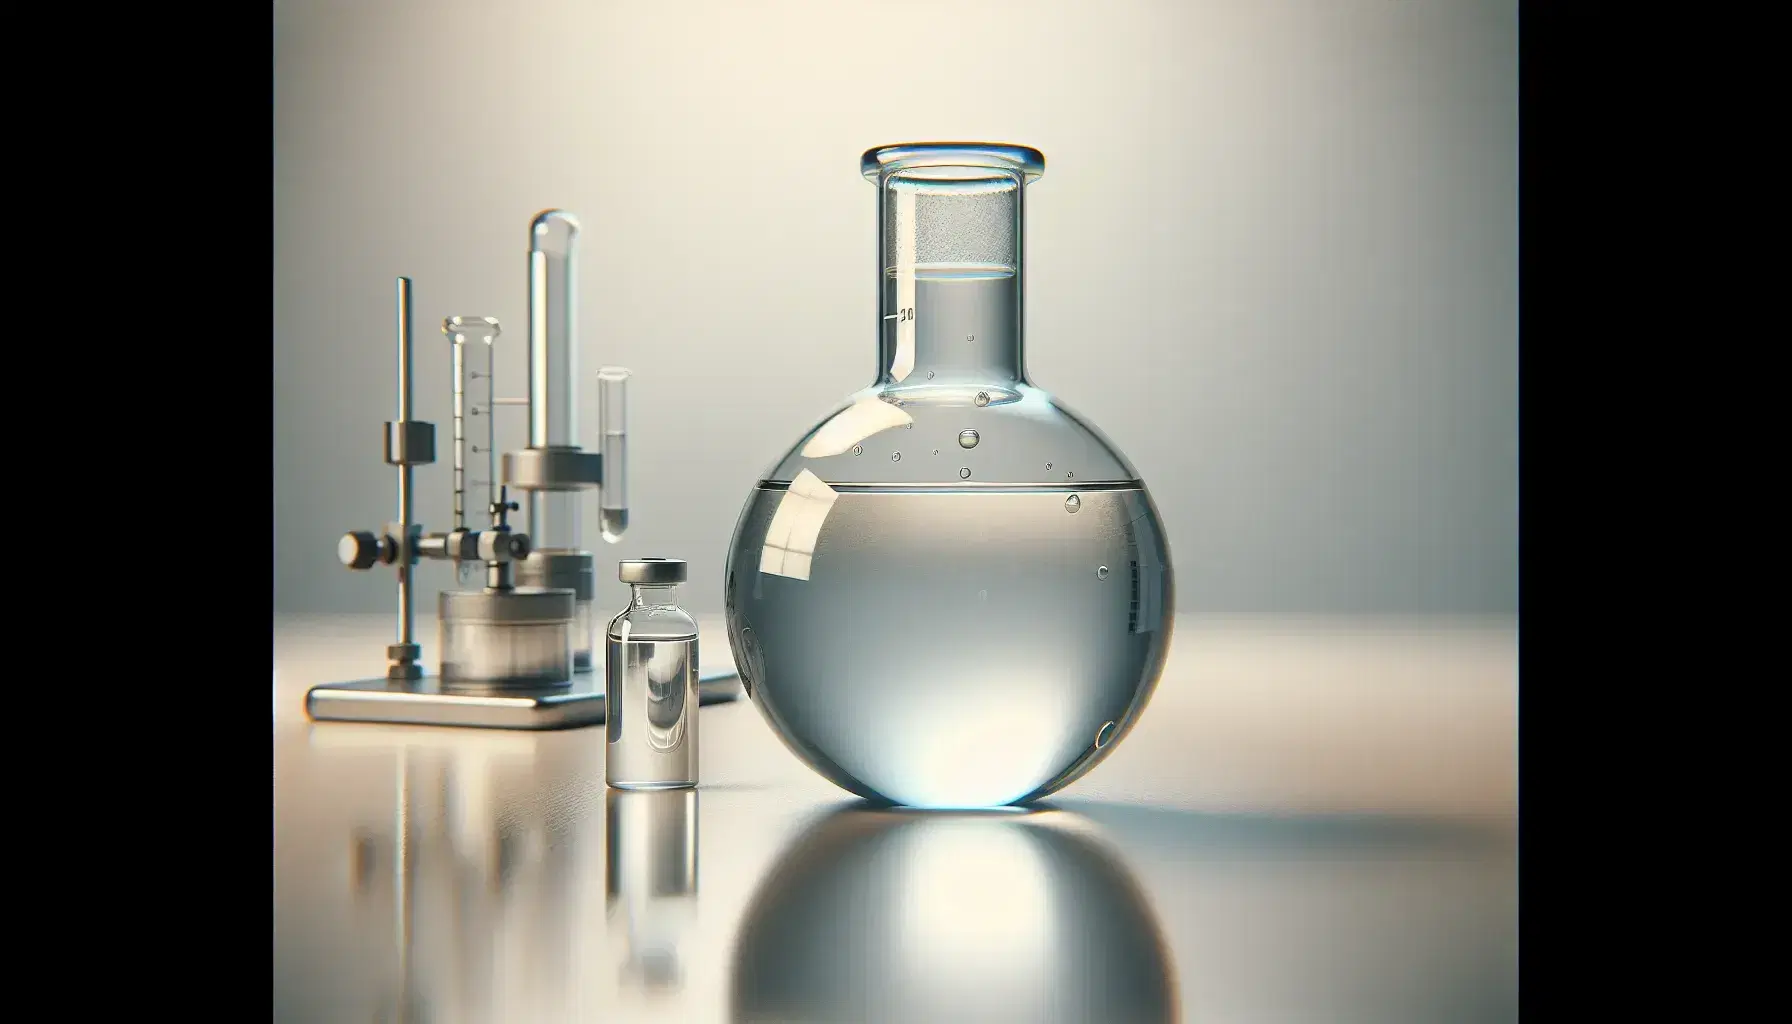 Glass flask with colorless liquid on reflective surface in laboratory, with vial and blurred equipment in background.